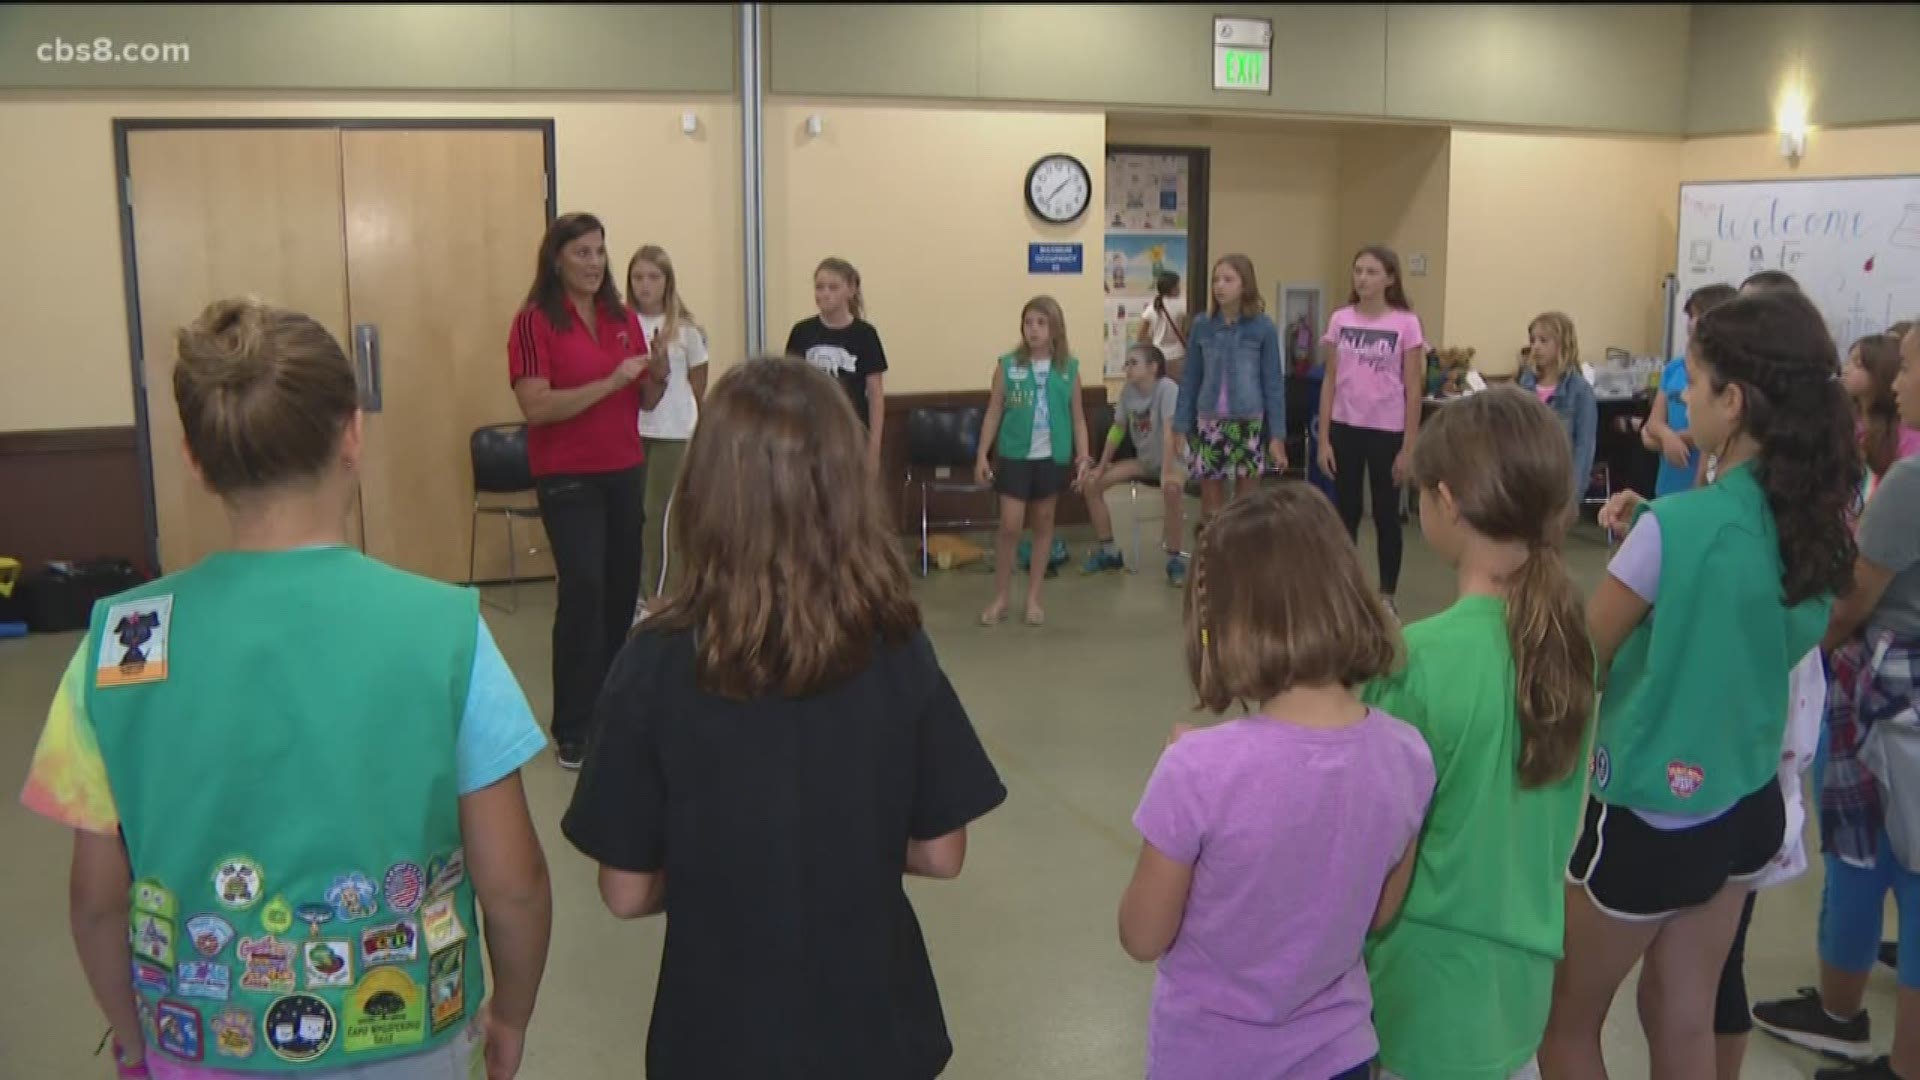 October is National Bullying Prevention Month and in San Diego there is a course specifically designed to teaching young girls how to stand up for themselves.